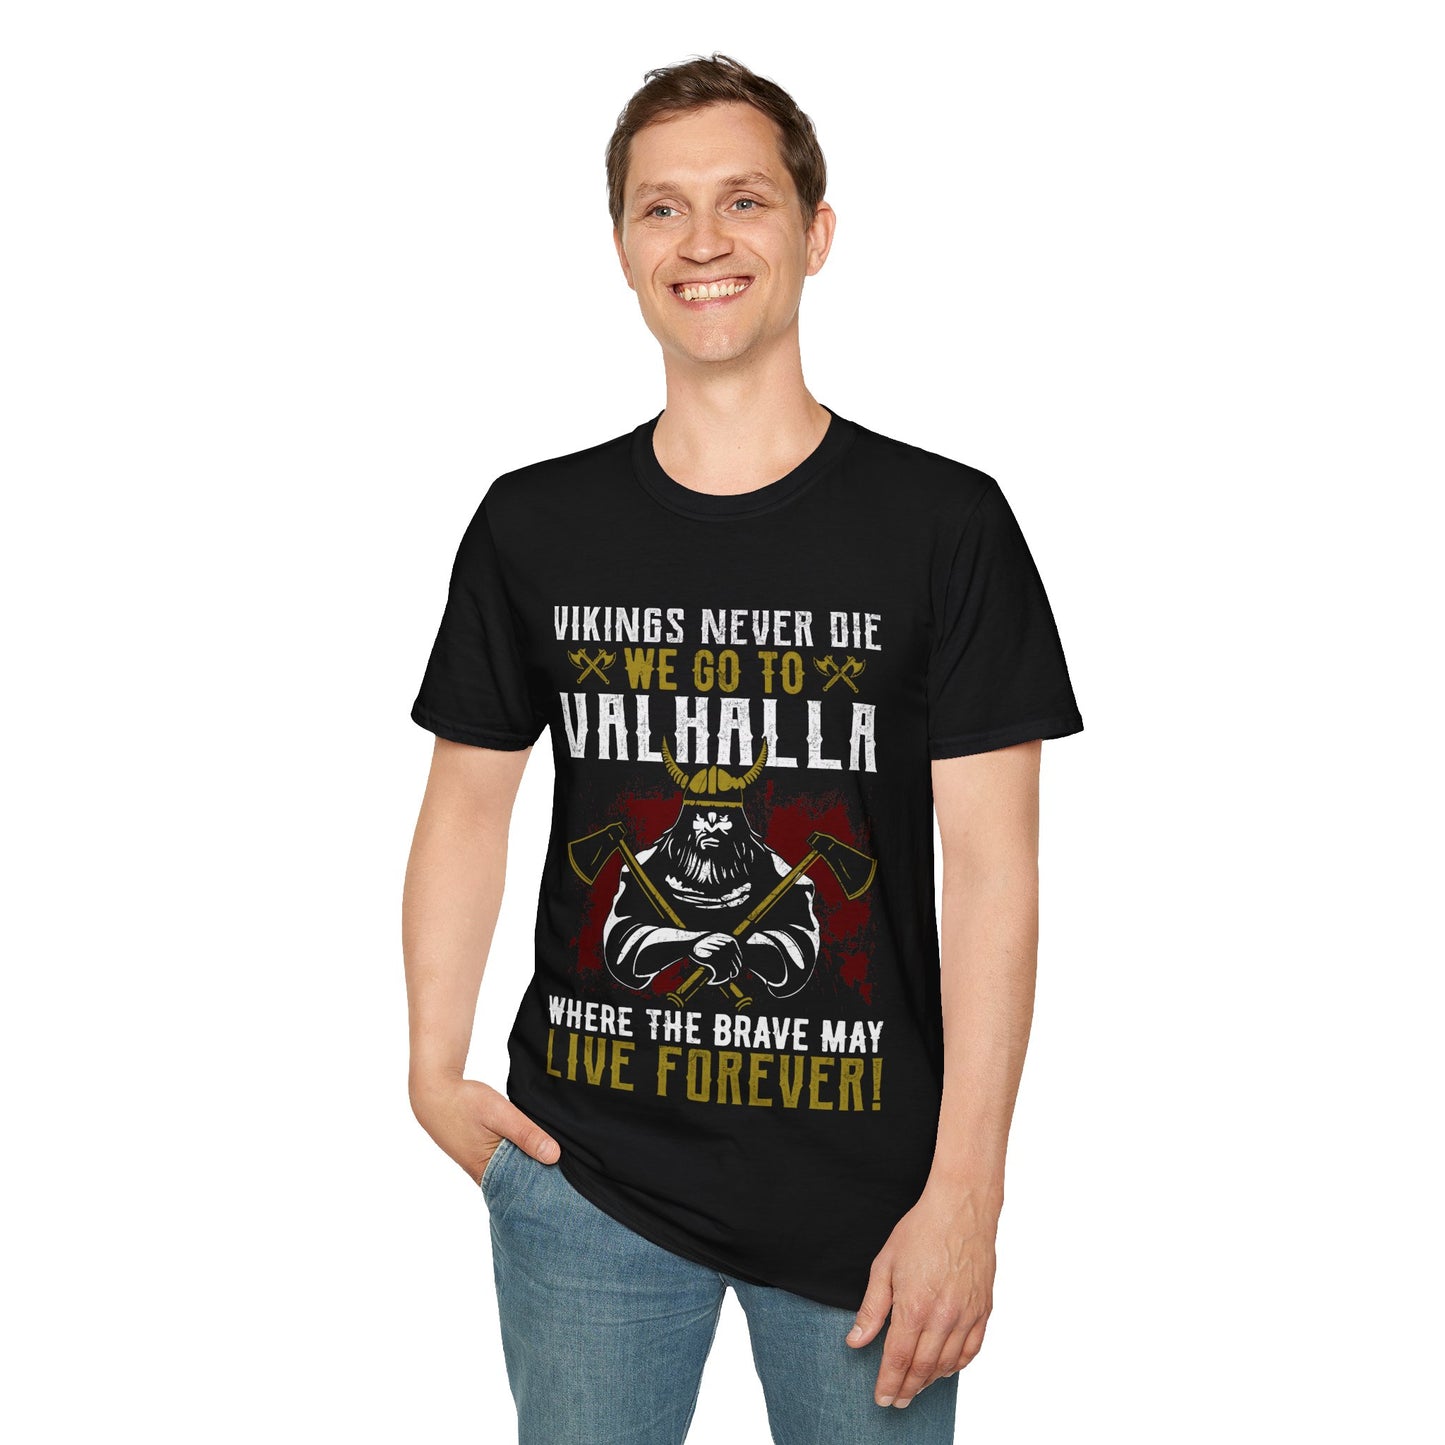 Viking Never Die We Go To Valhalla Where The Brave May Live Forever T-Shirt